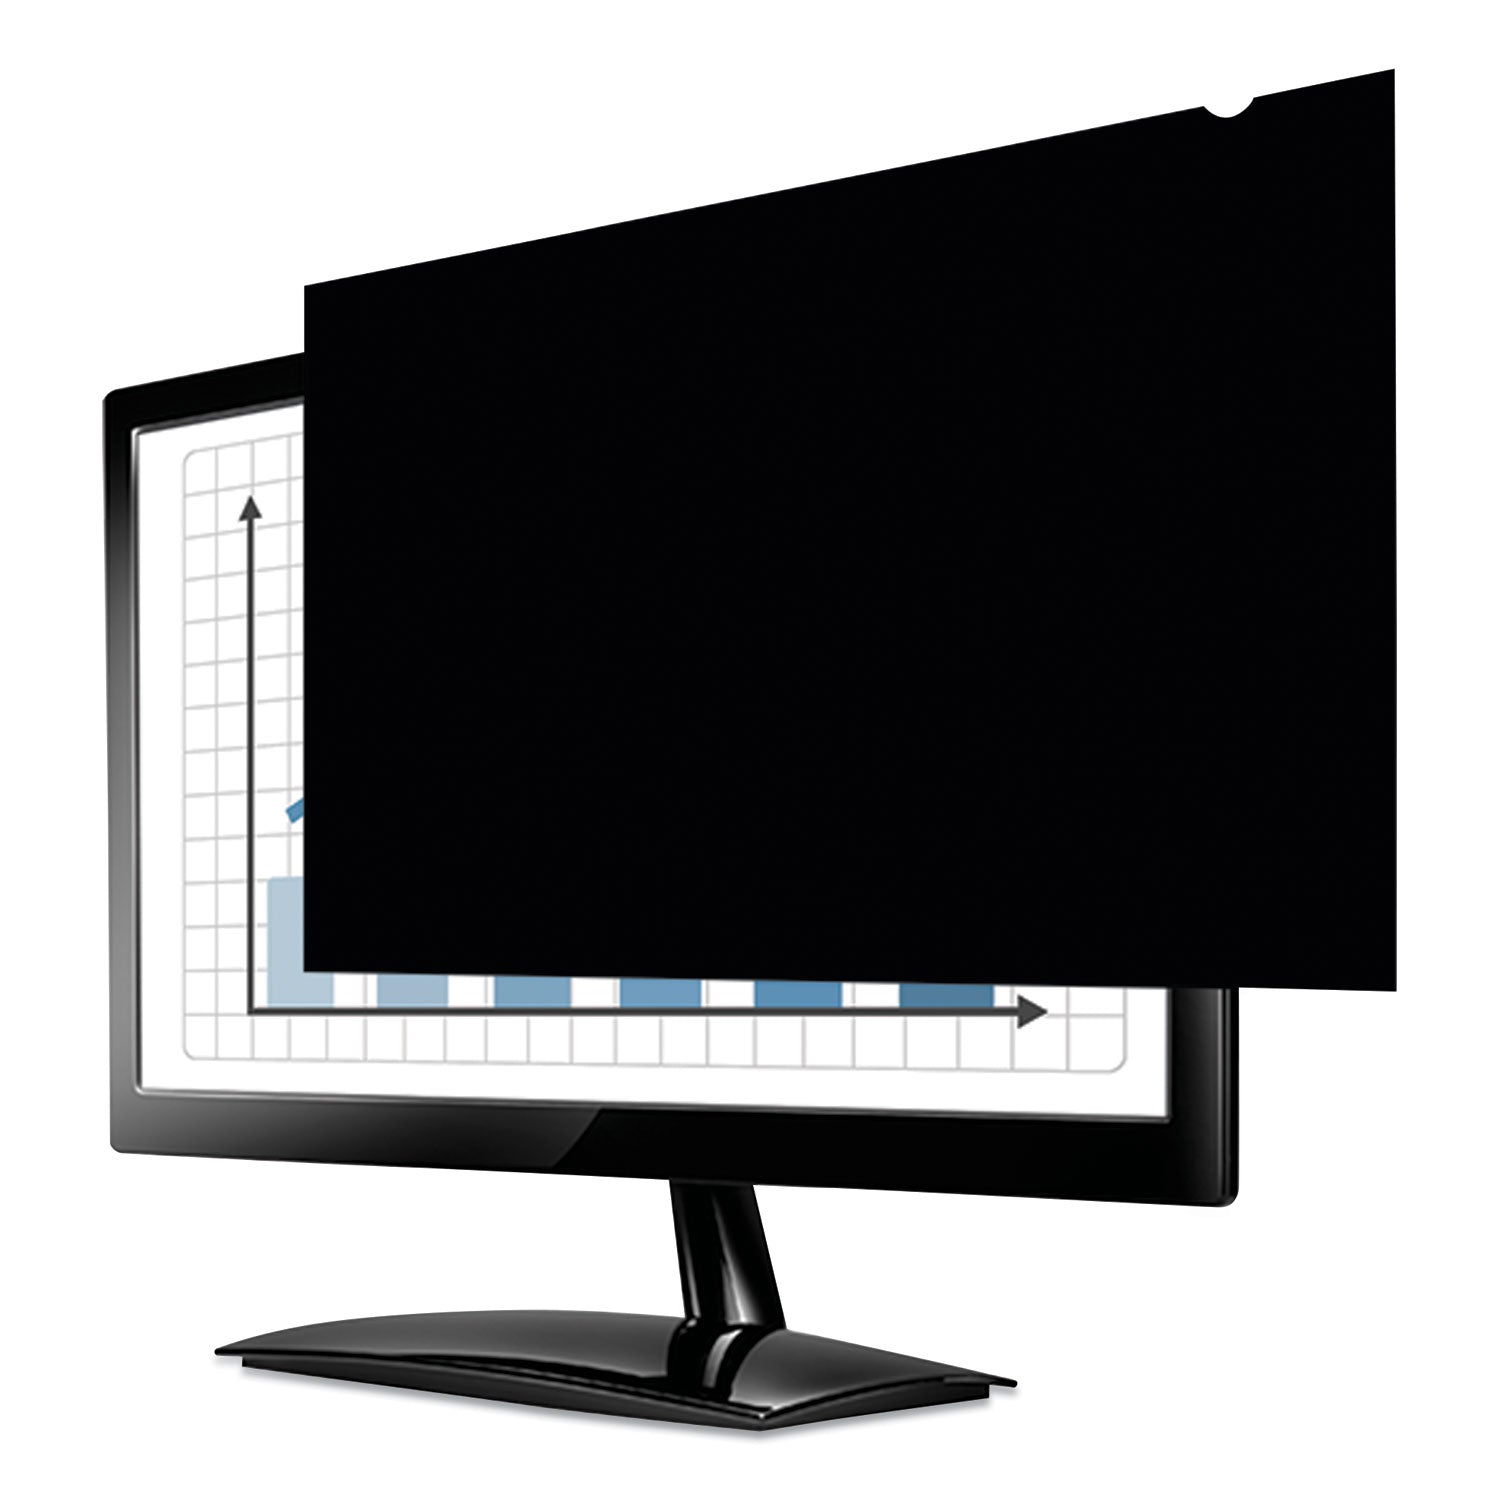 PrivaScreen Blackout Privacy Filter for 19" Flat Panel Monitor/Laptop - 